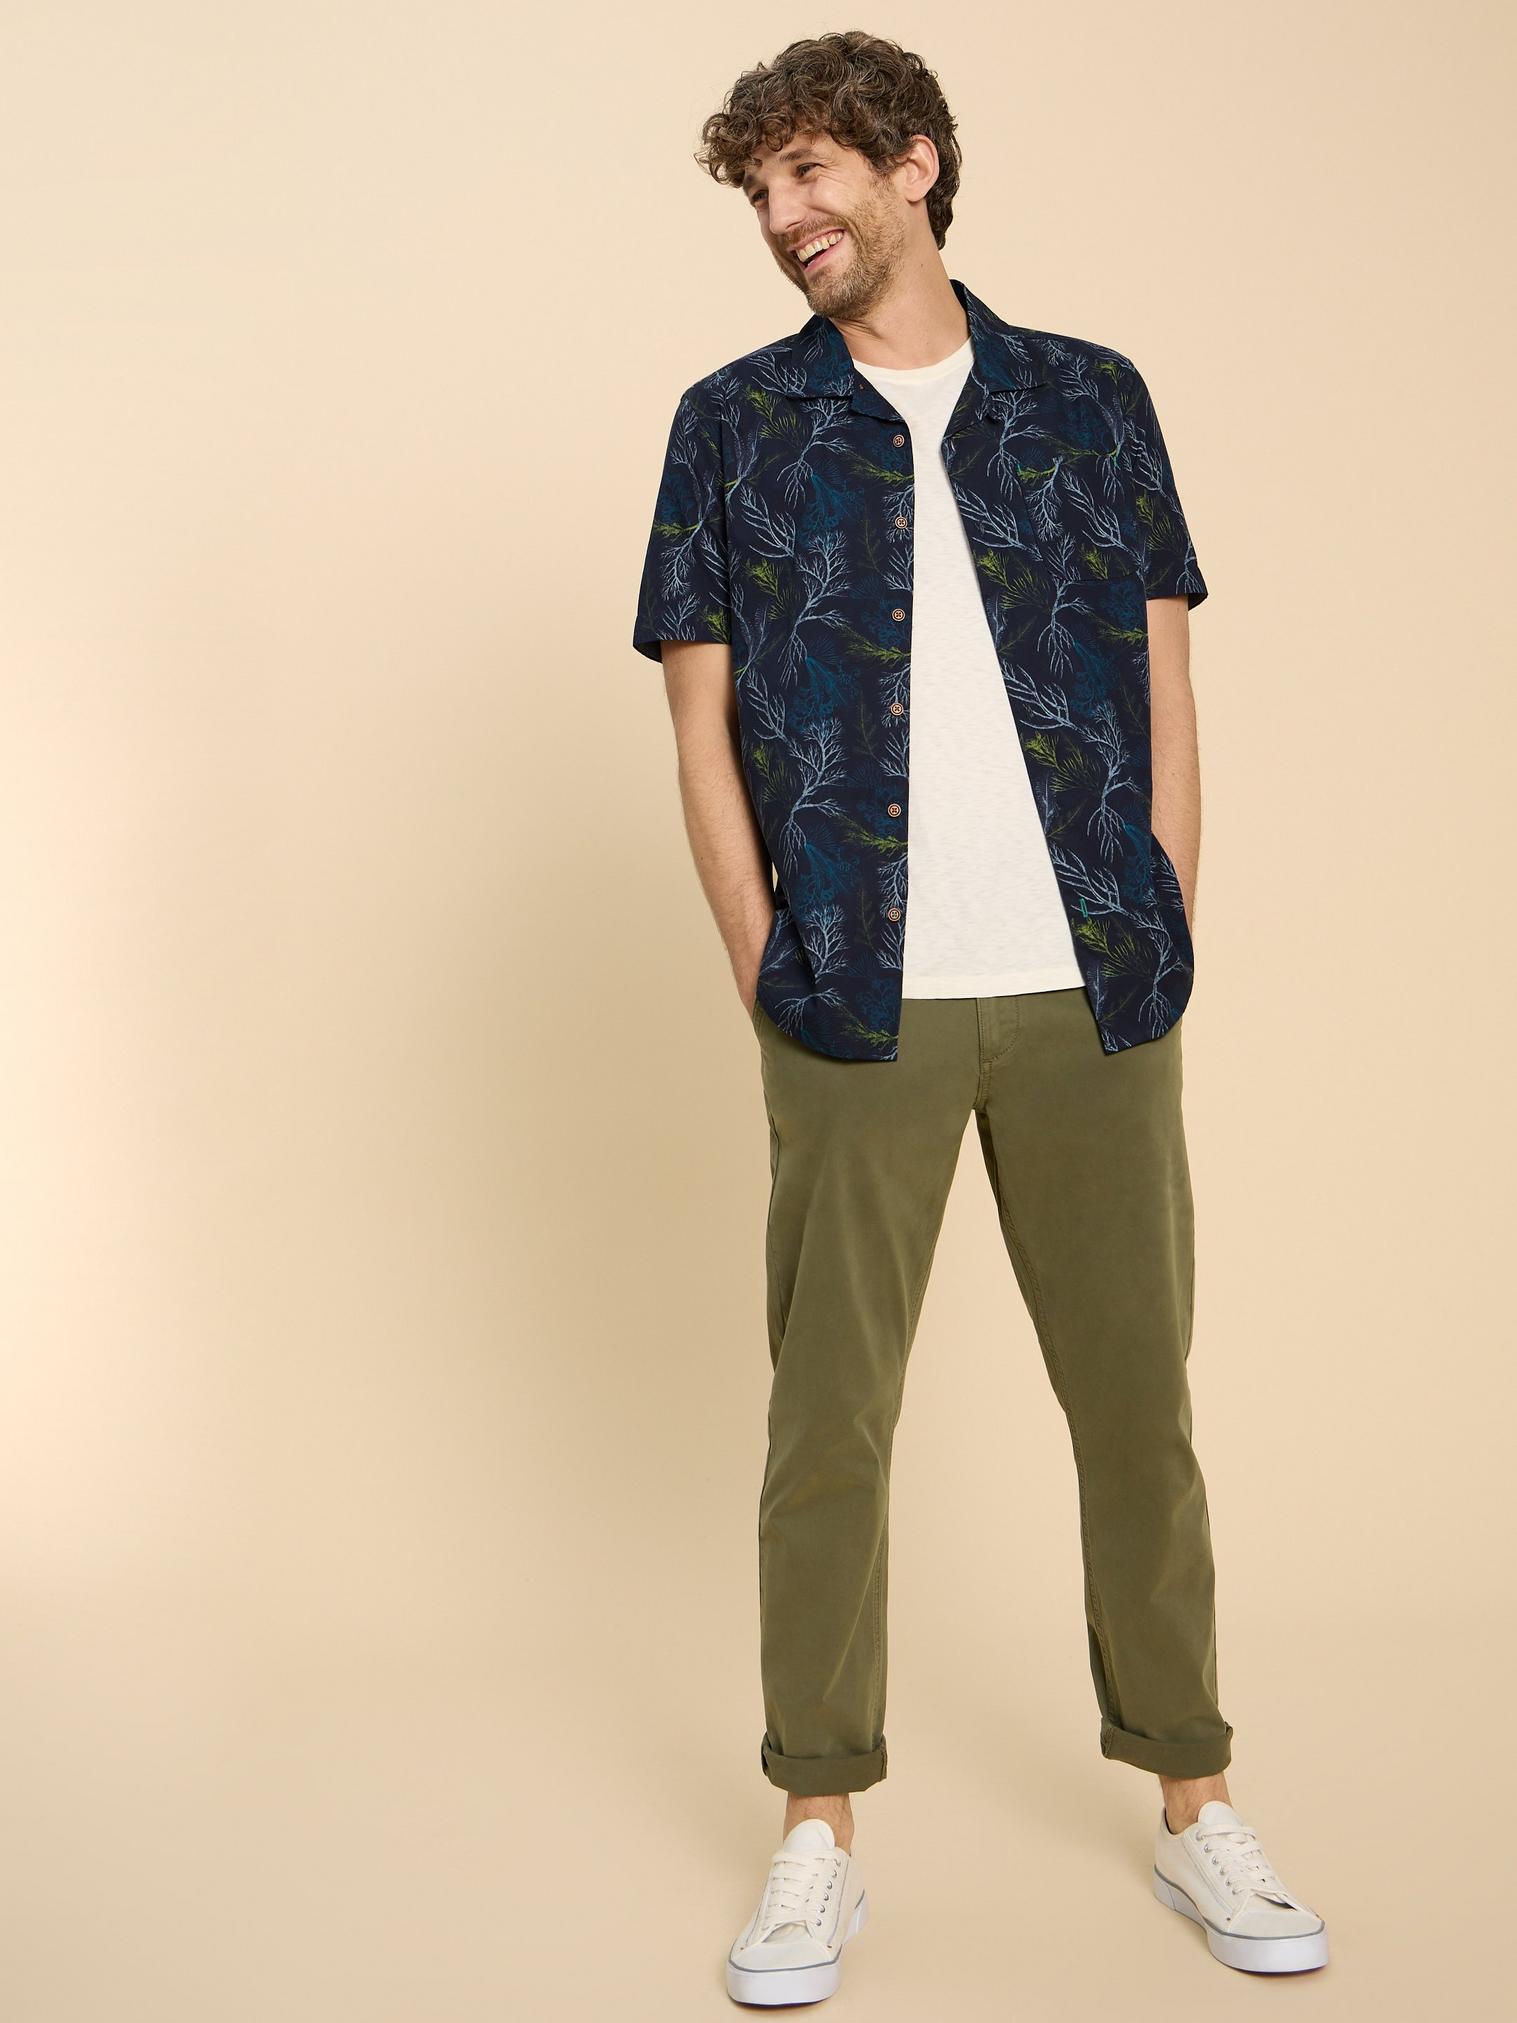 Crab Printed SS Shirt in NAVY PR - MODEL FRONT